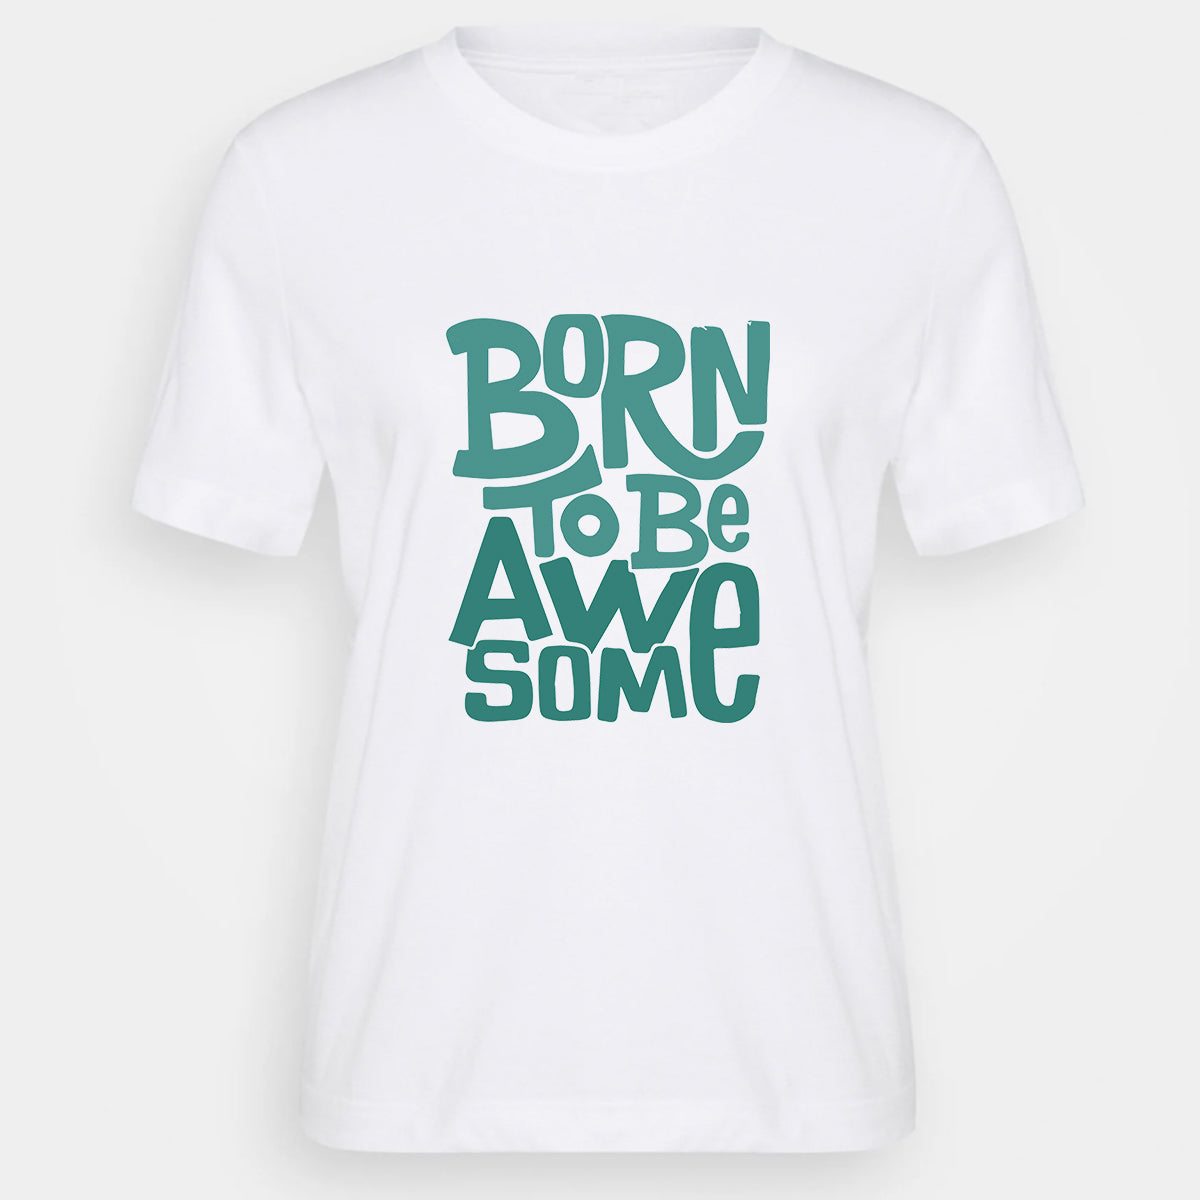 Born To Be Awesome - Printed Cotton T- Shirt - White